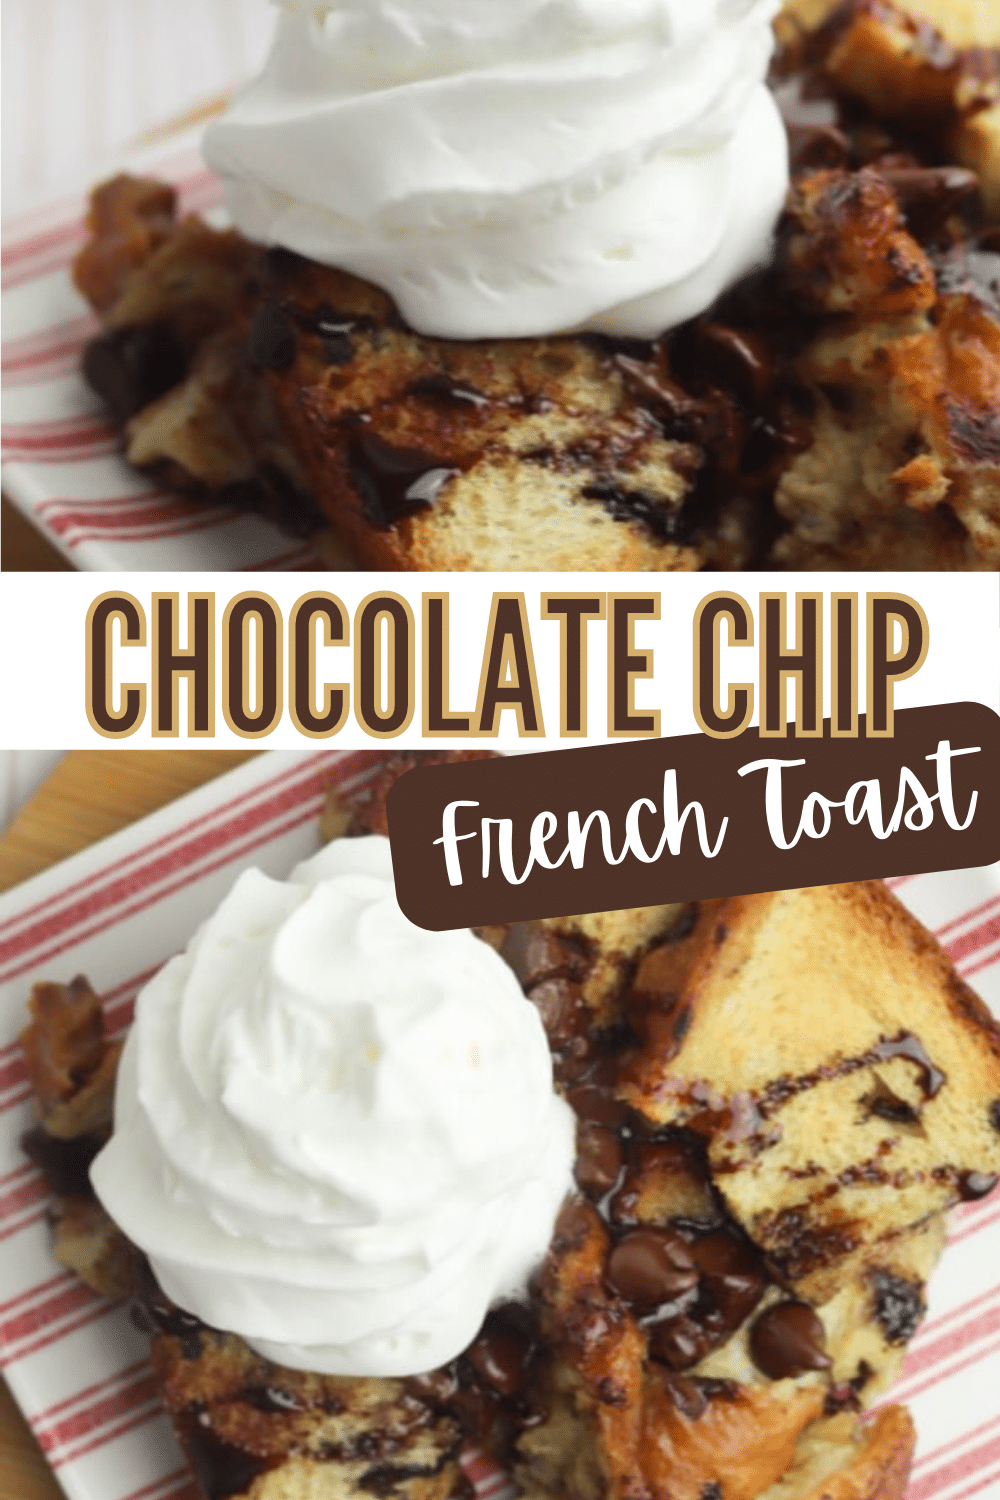 Chocolate Chip French Toast makes a special breakfast or brunch dish the whole family will love. Easy to make and packed with chocolate chips. #frenchtoast #bakedfrenchtoast #breakfast via @wondermomwannab